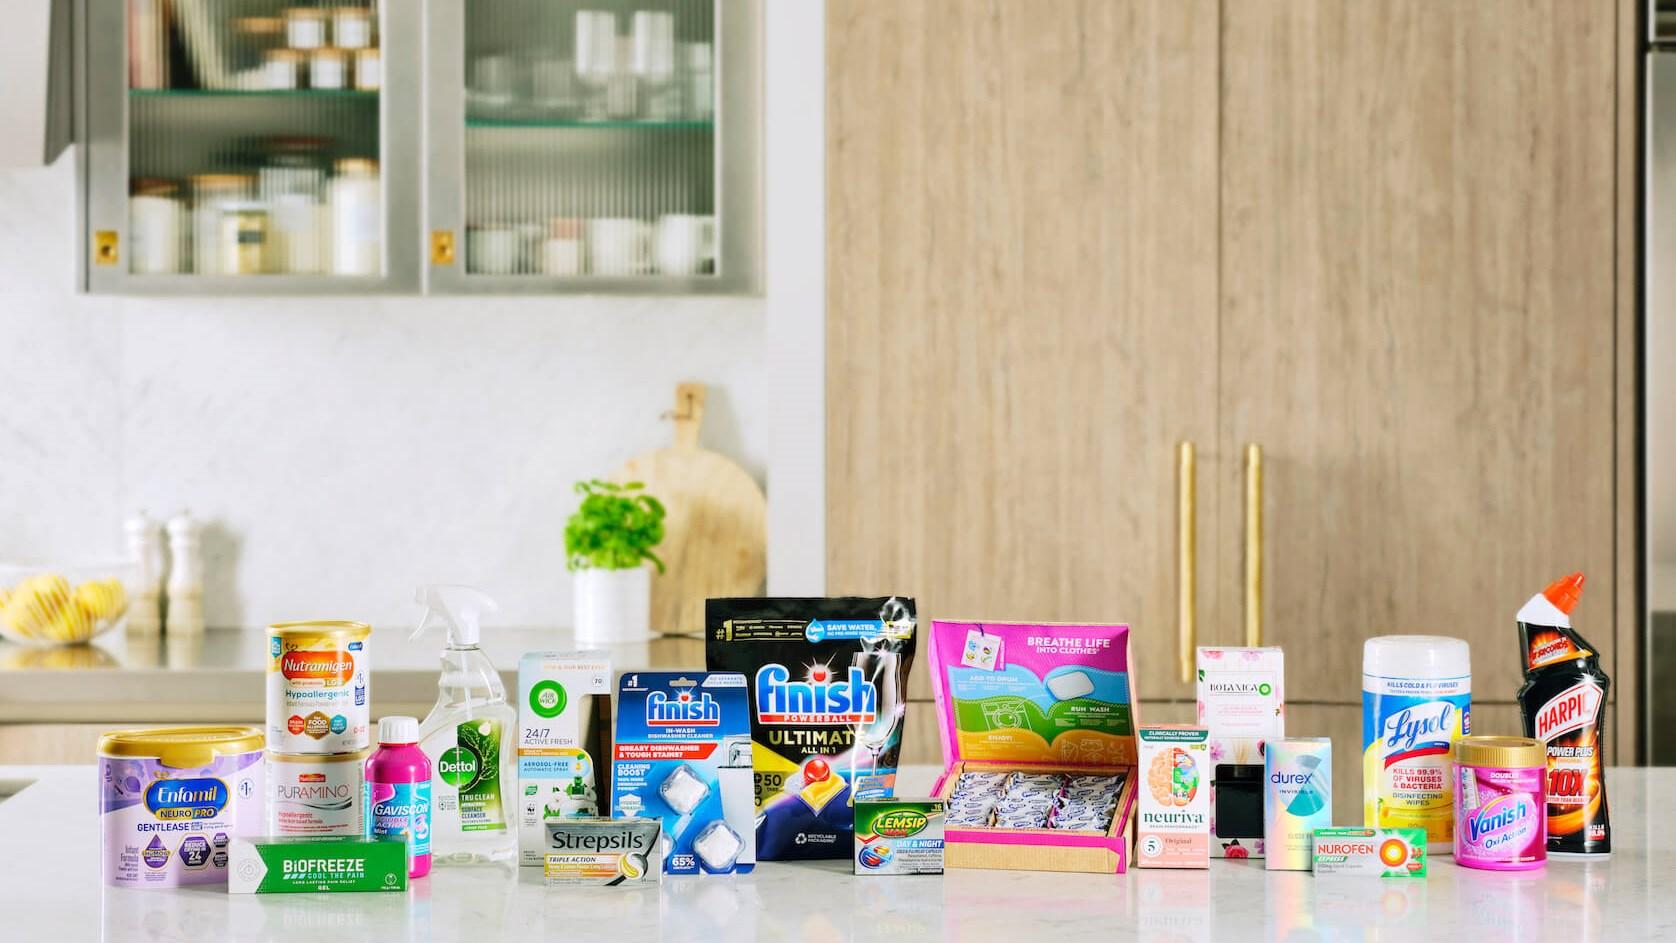 A lineup of products from the Reckitt range of brands lined up on a kitchen bench. Includes products from Finish, Harpic, Vanish, and Lysol.